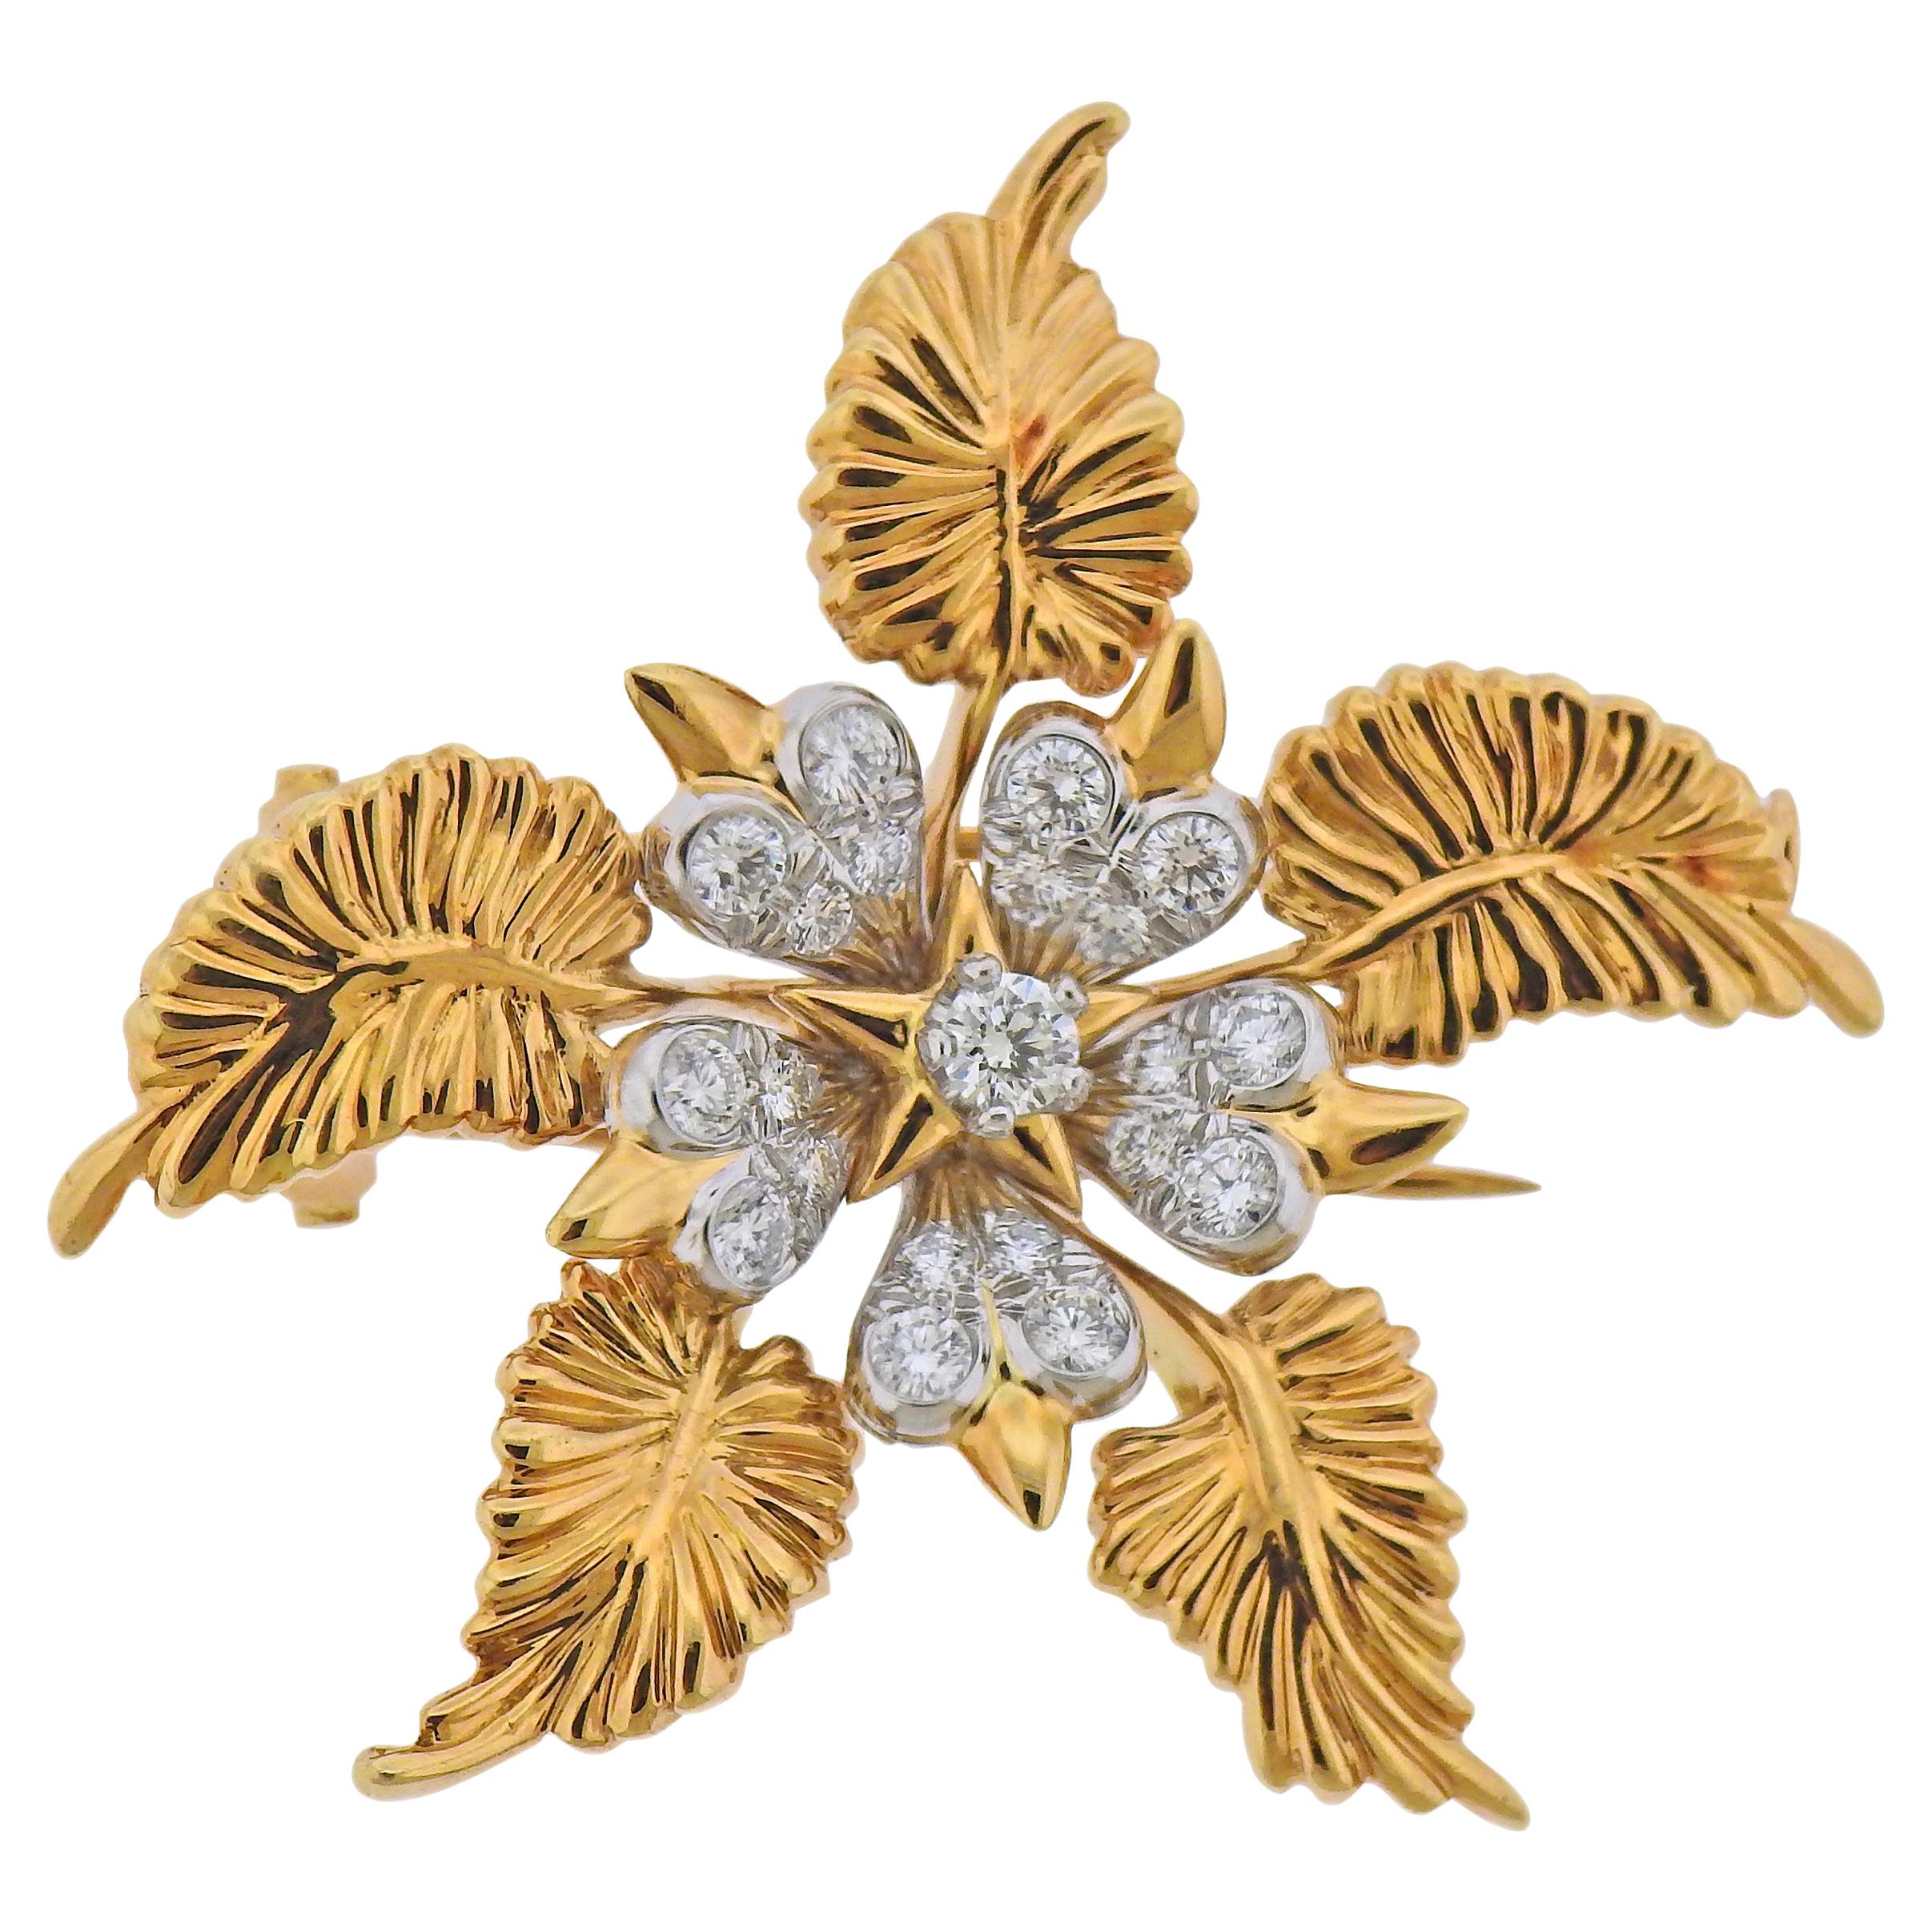 Jean Schlumberger for Tiffany & Co. diamond, platinum and gold brooch